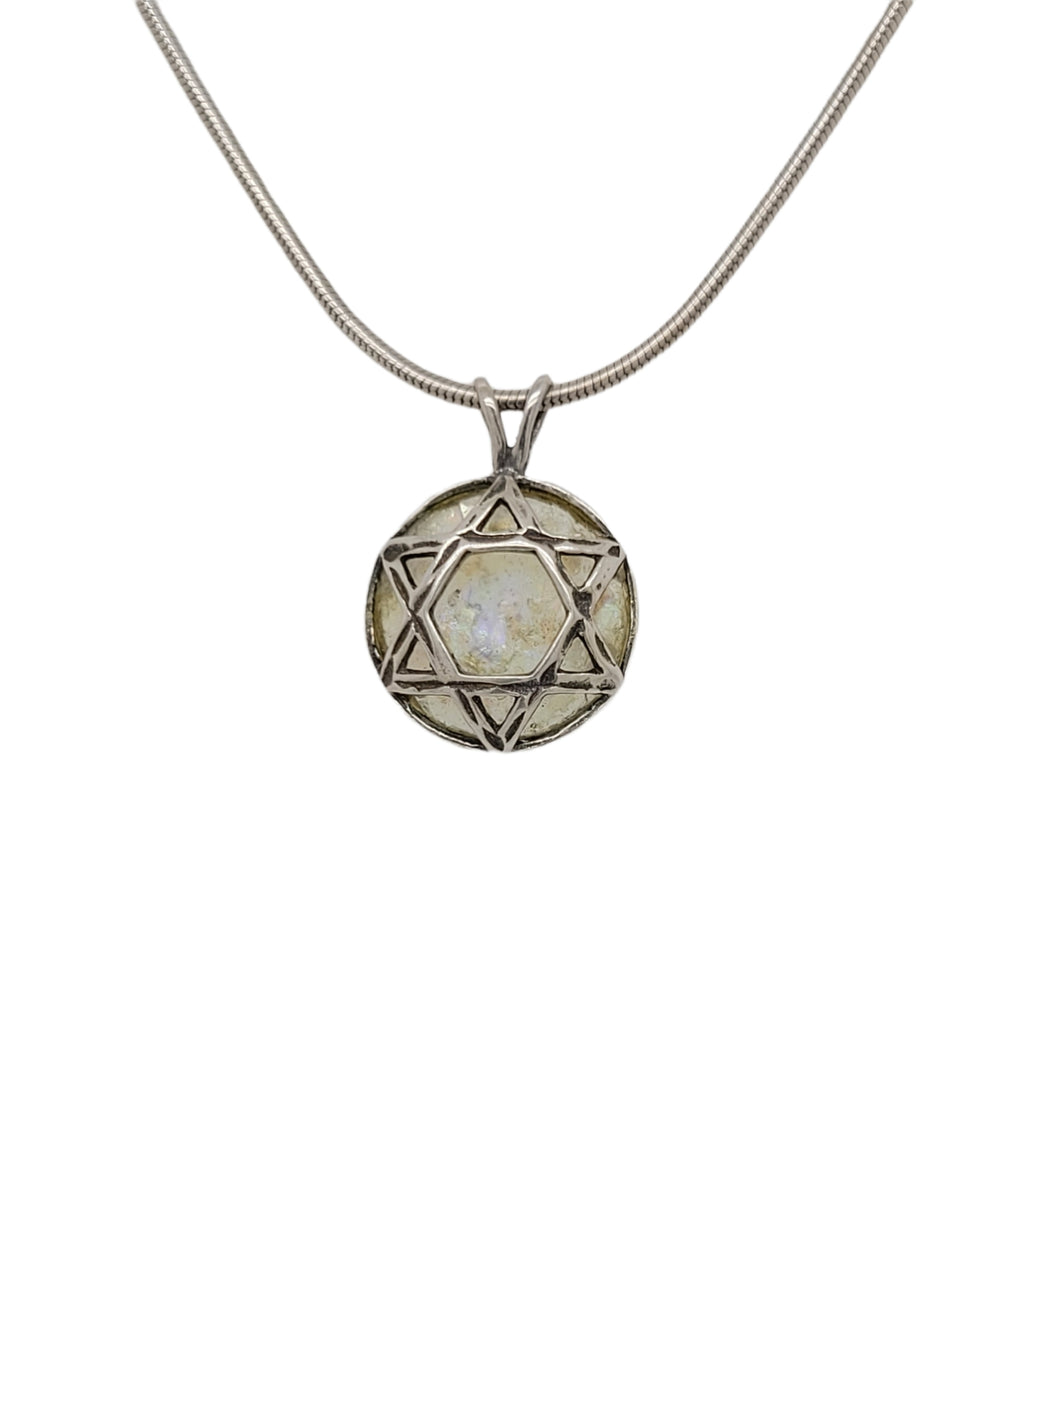 Sterling Silver Roman Glass Star of David Pendant Necklace